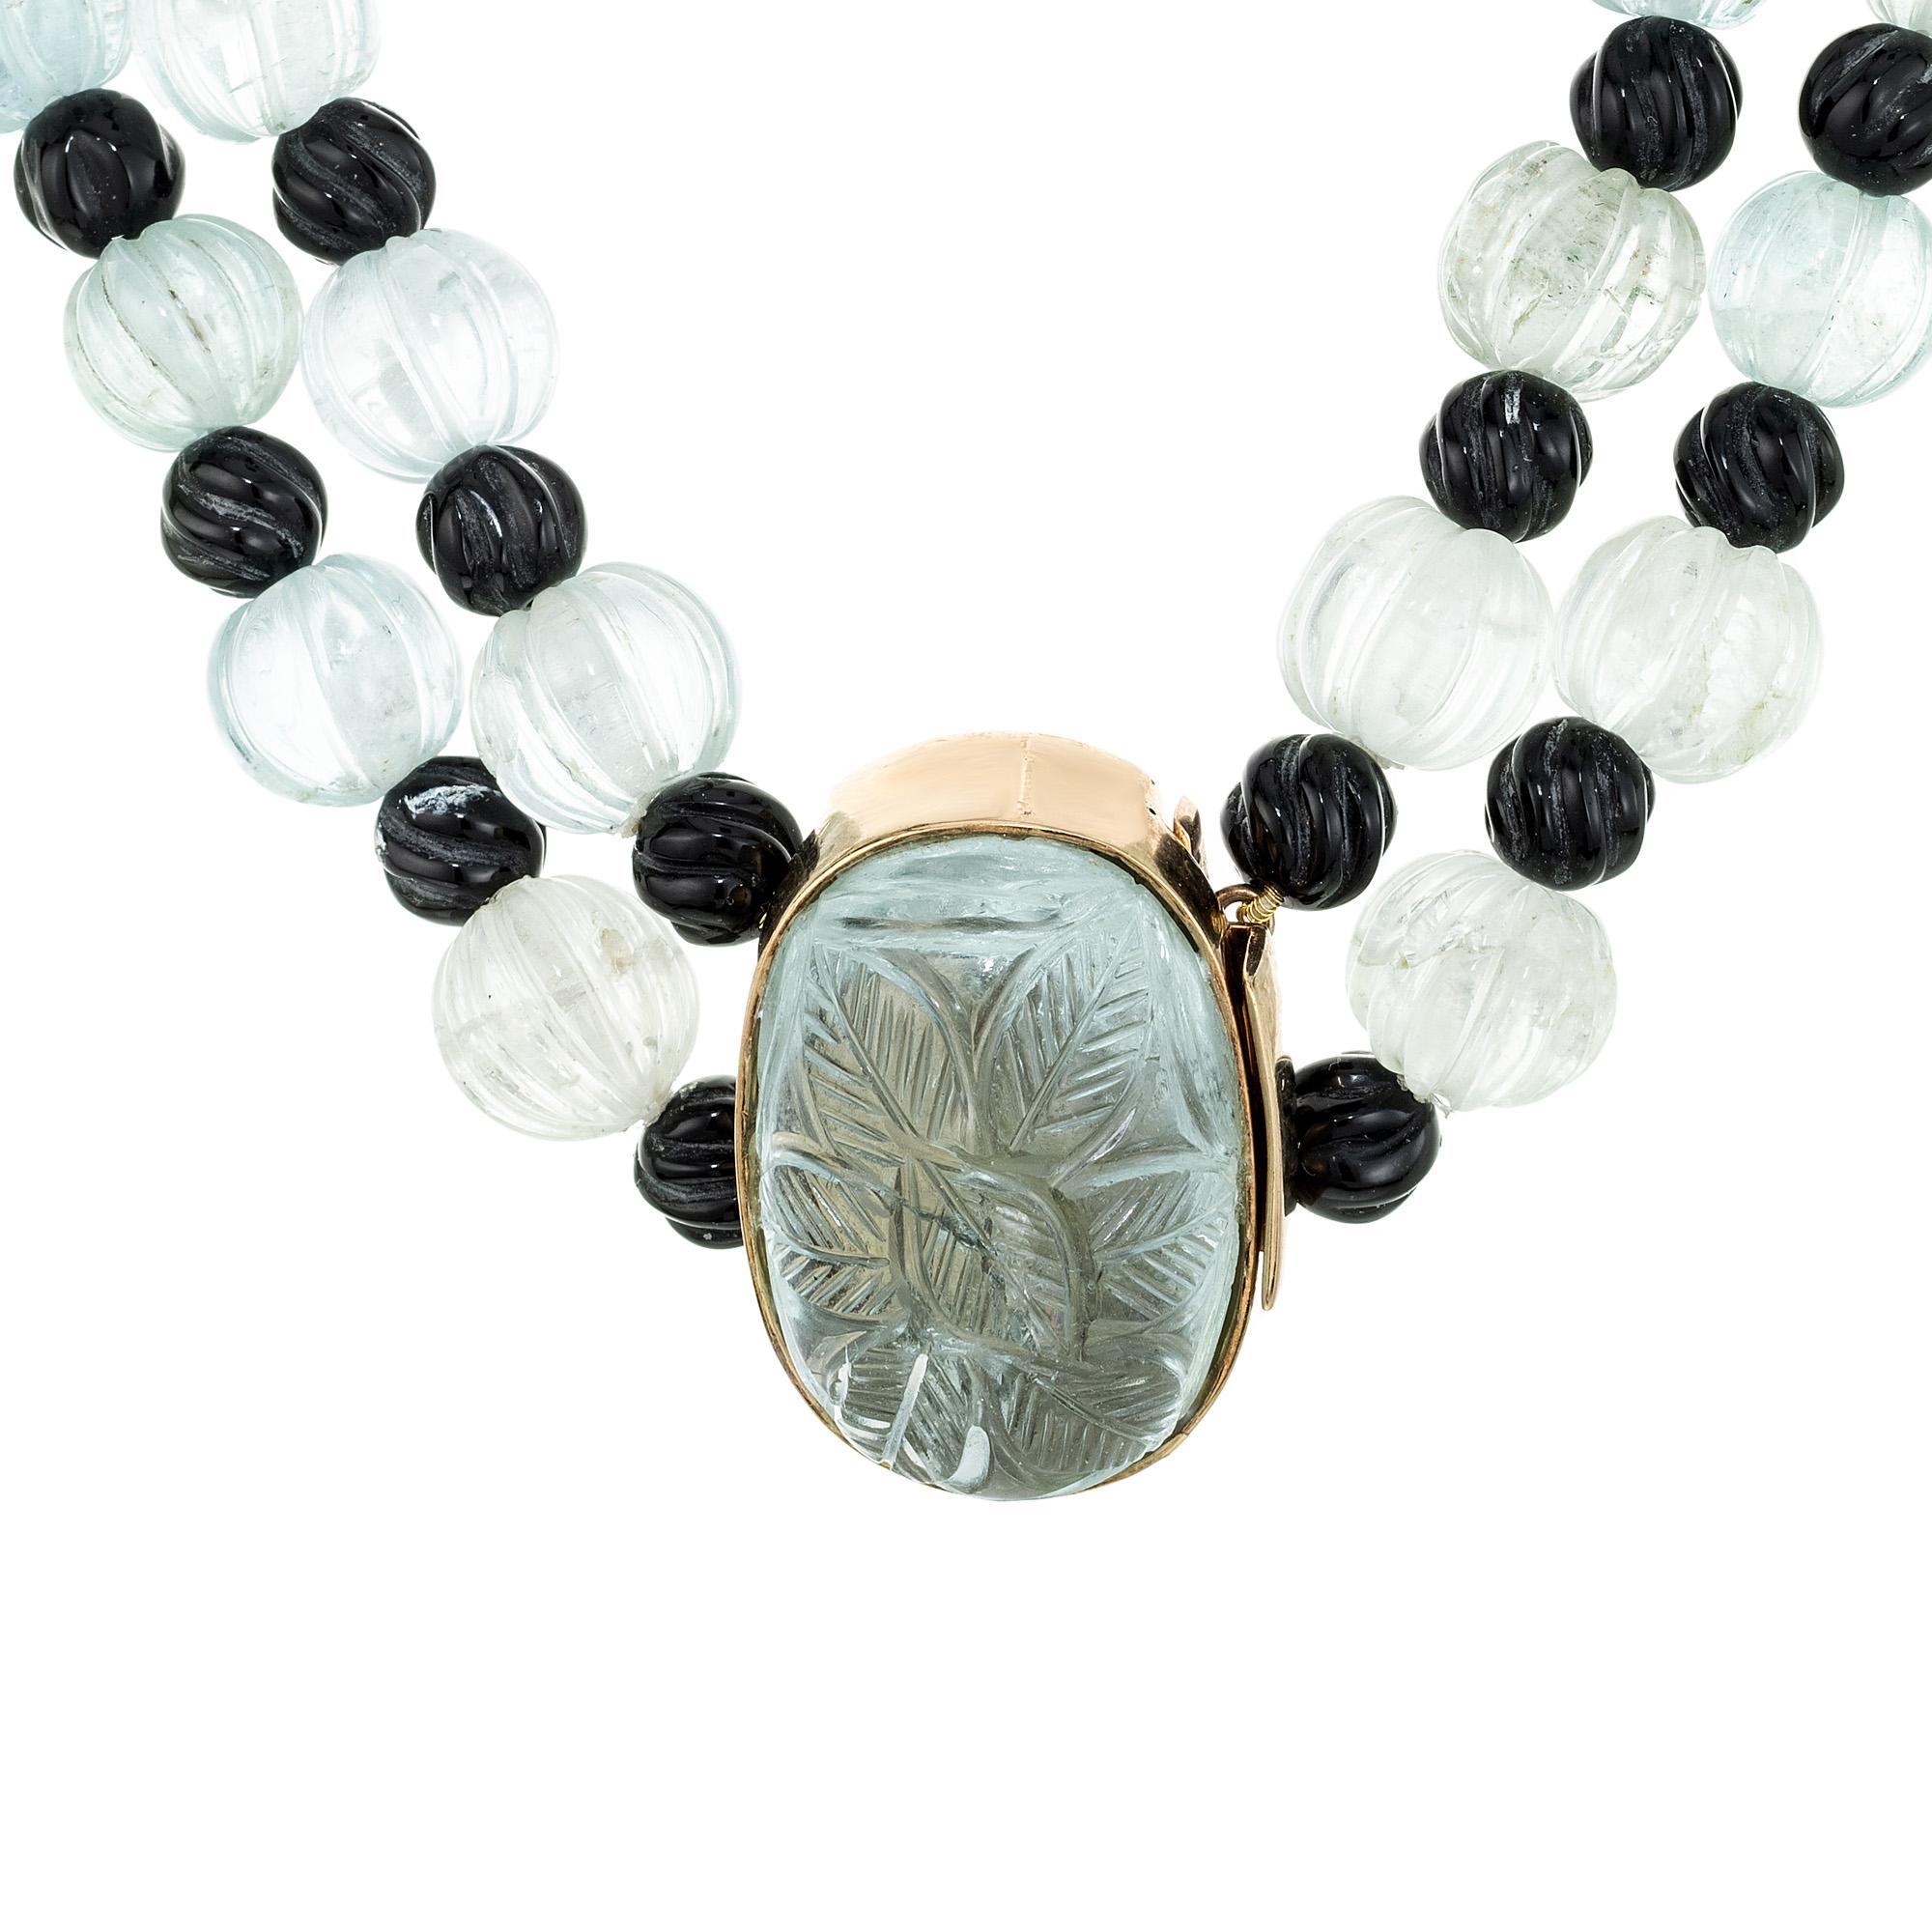 English hand carved 1920's Art Deco genuine natural untreated Aqua and Onyx two strand necklace. 16.5 to 17 inch length. Genuine carved Aqua beads 10mm to 8mm. alternating with round onyx beads. The catch has an oval aquamarine which is carved as